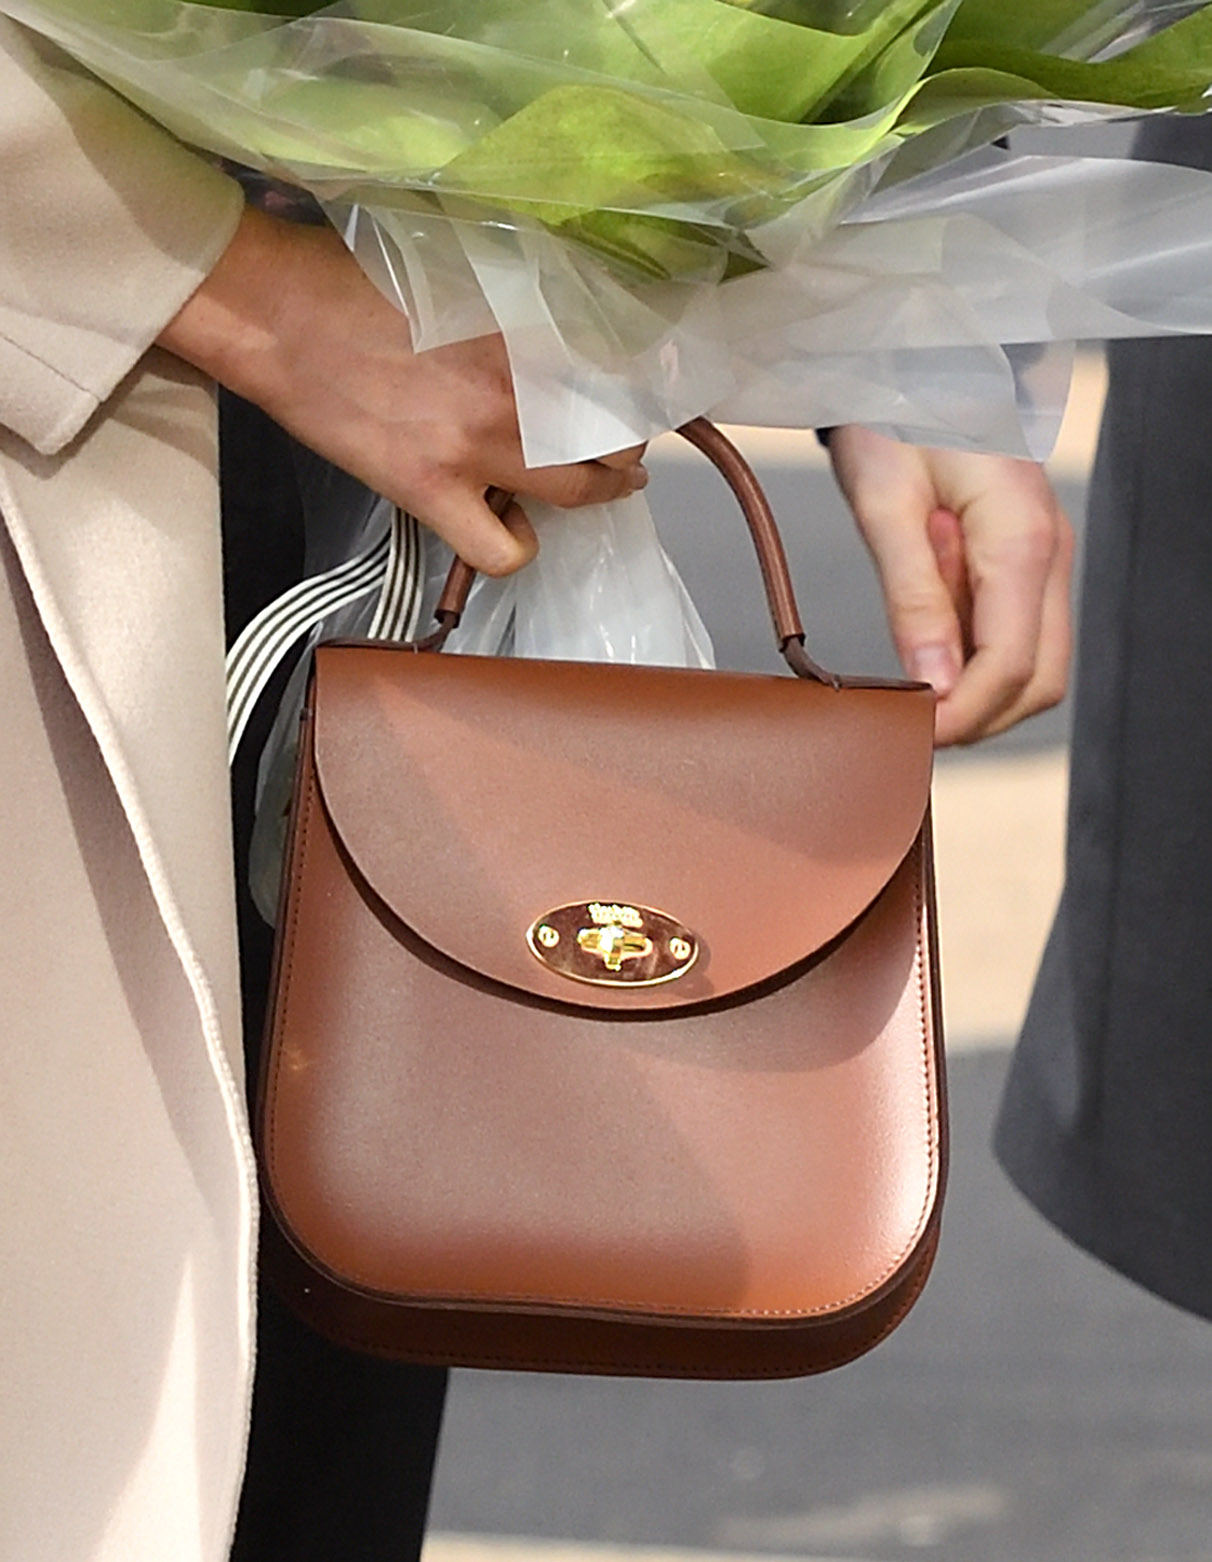 Meghan Markle carrying a Charlotte Elizabeth handbag in Northern Ireland in 2018 | Source: Getty Images